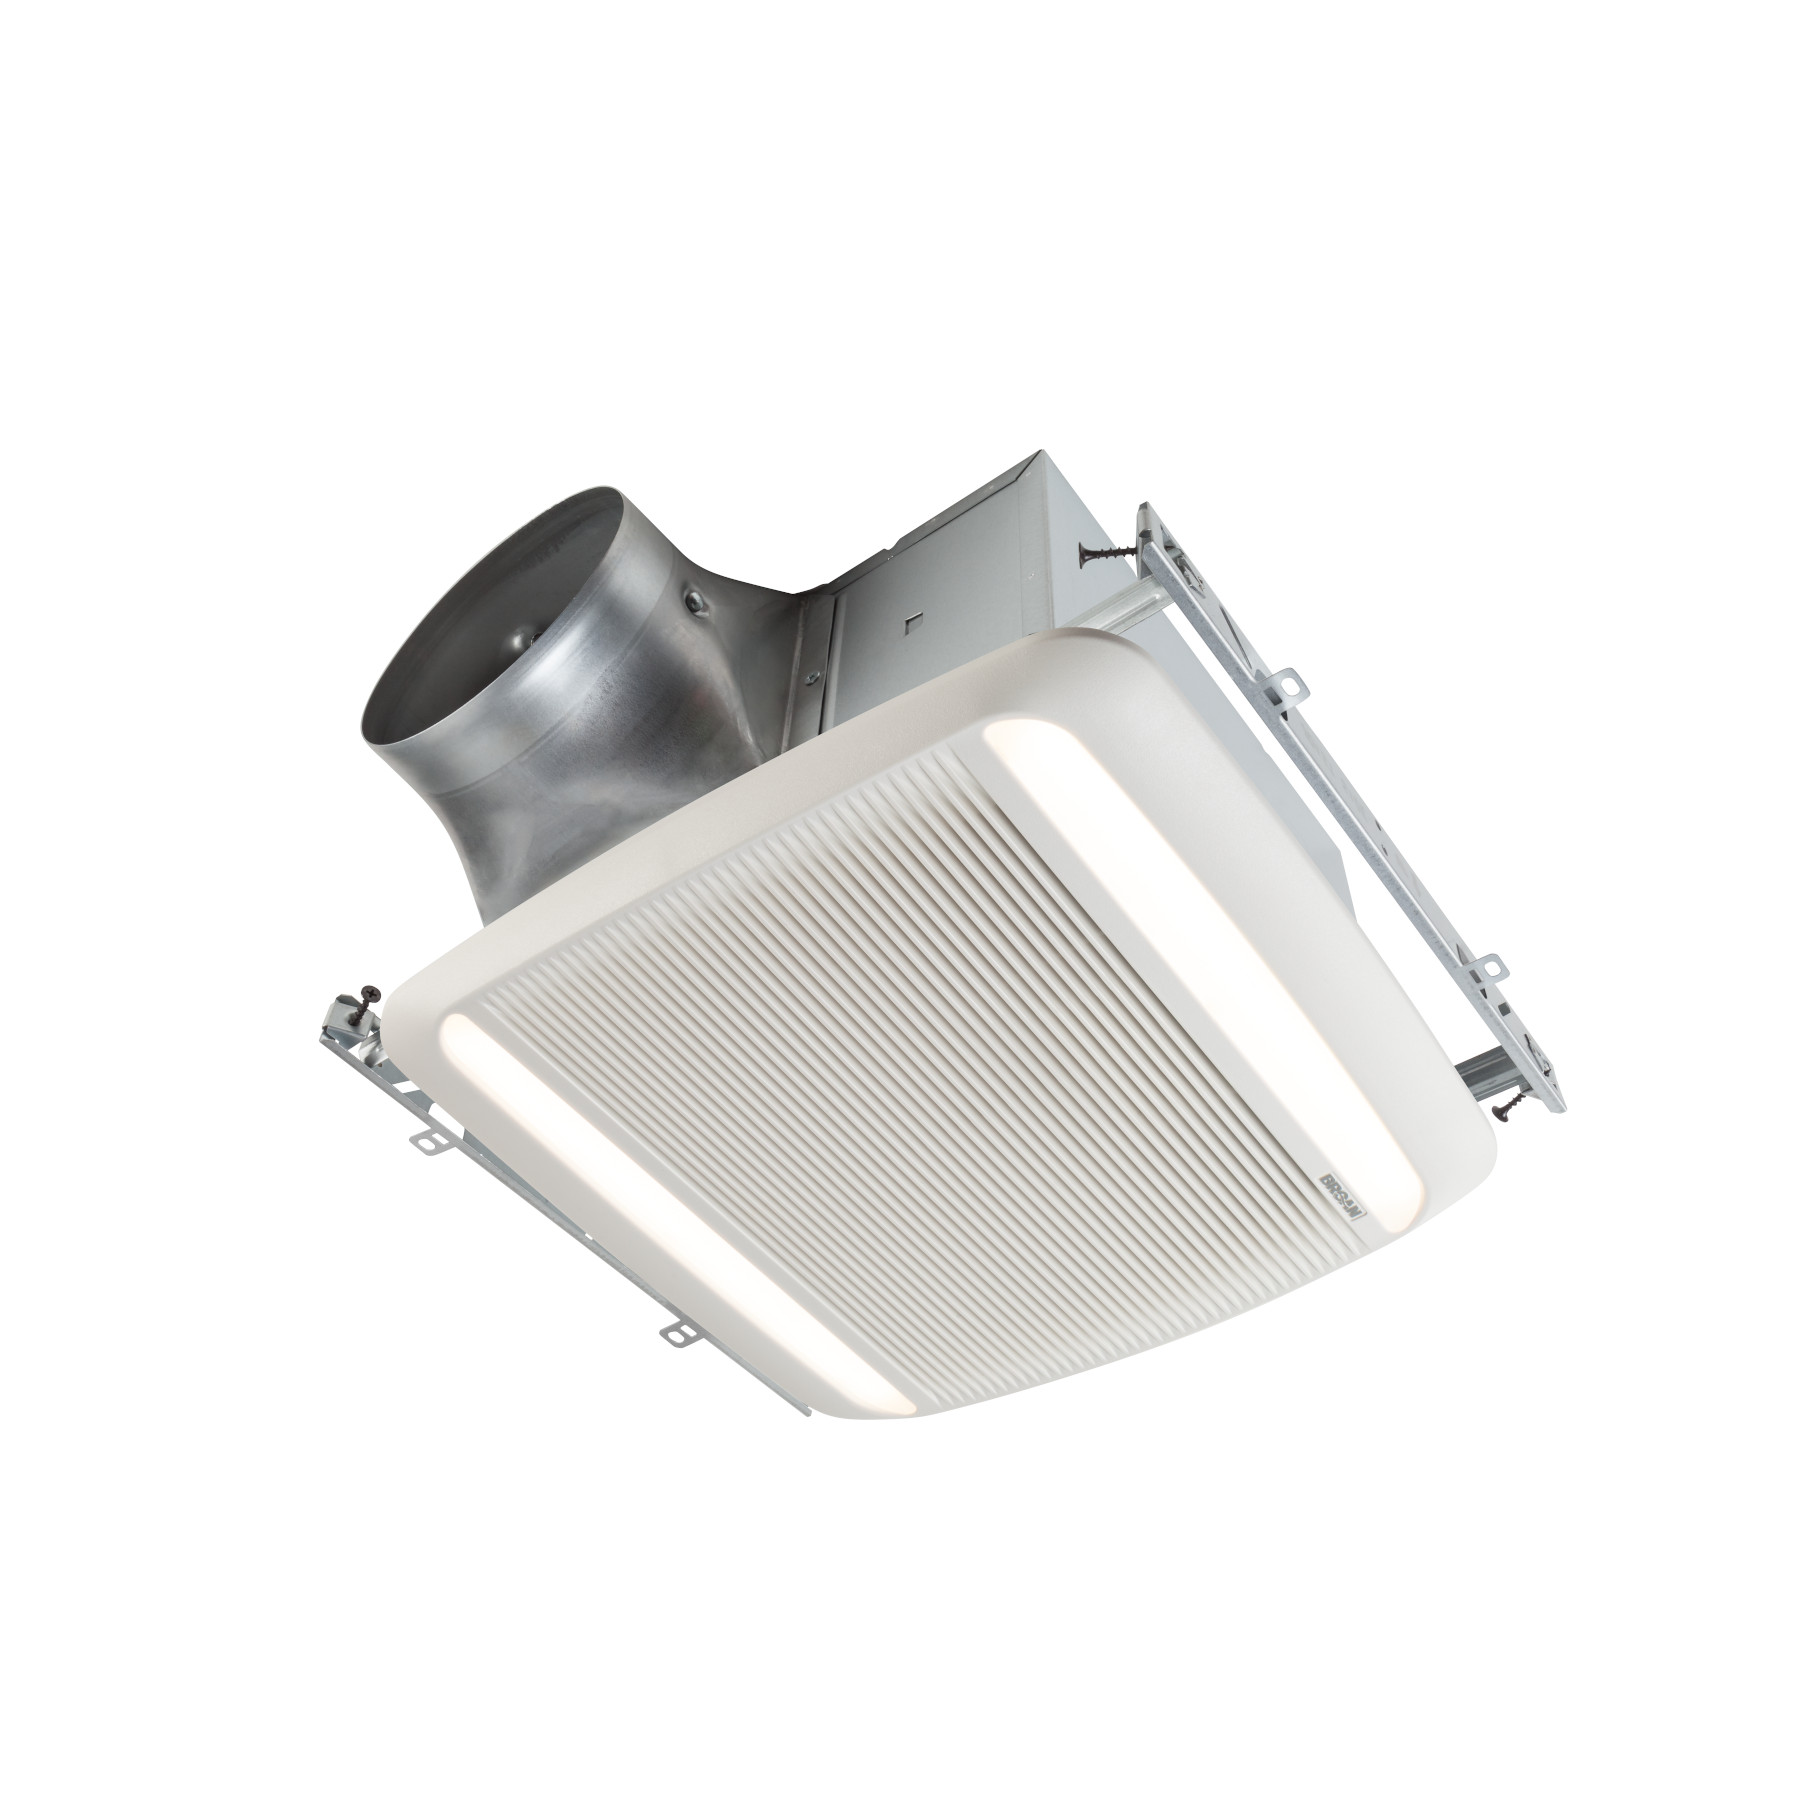 ULTRA GREEN ZB Series 110 CFM Multi-Speed Ceiling Bathroom Exhaust Fan with LED Light, ENERGY STAR® certified